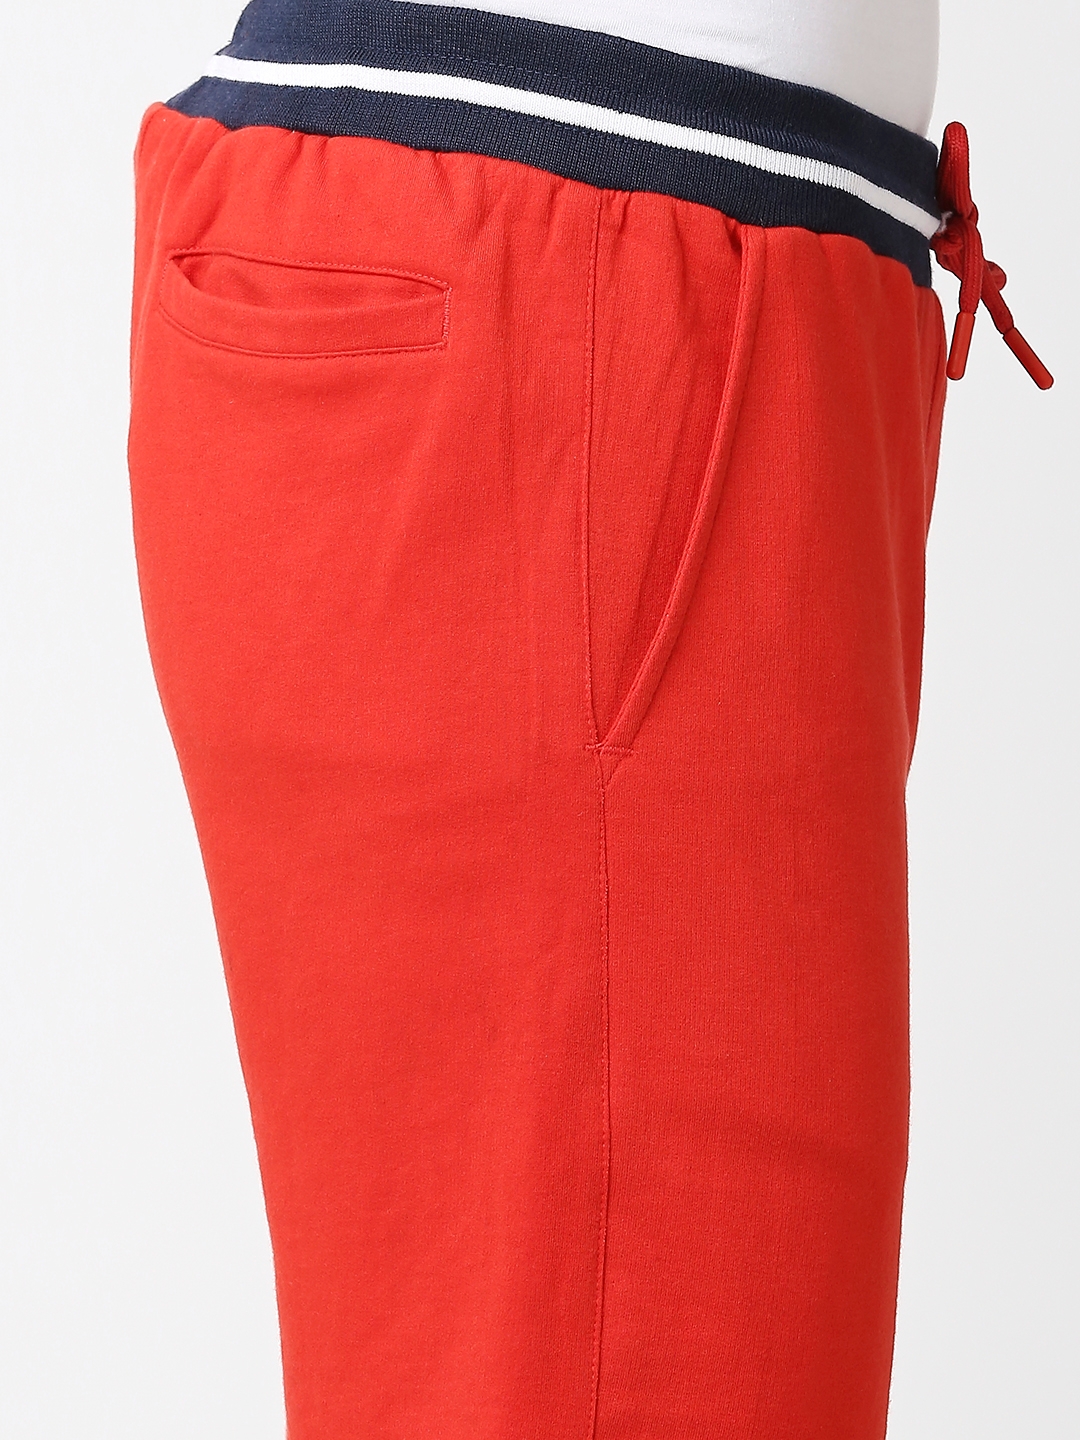 Men's  Slim Fit Cotton Red Shorts